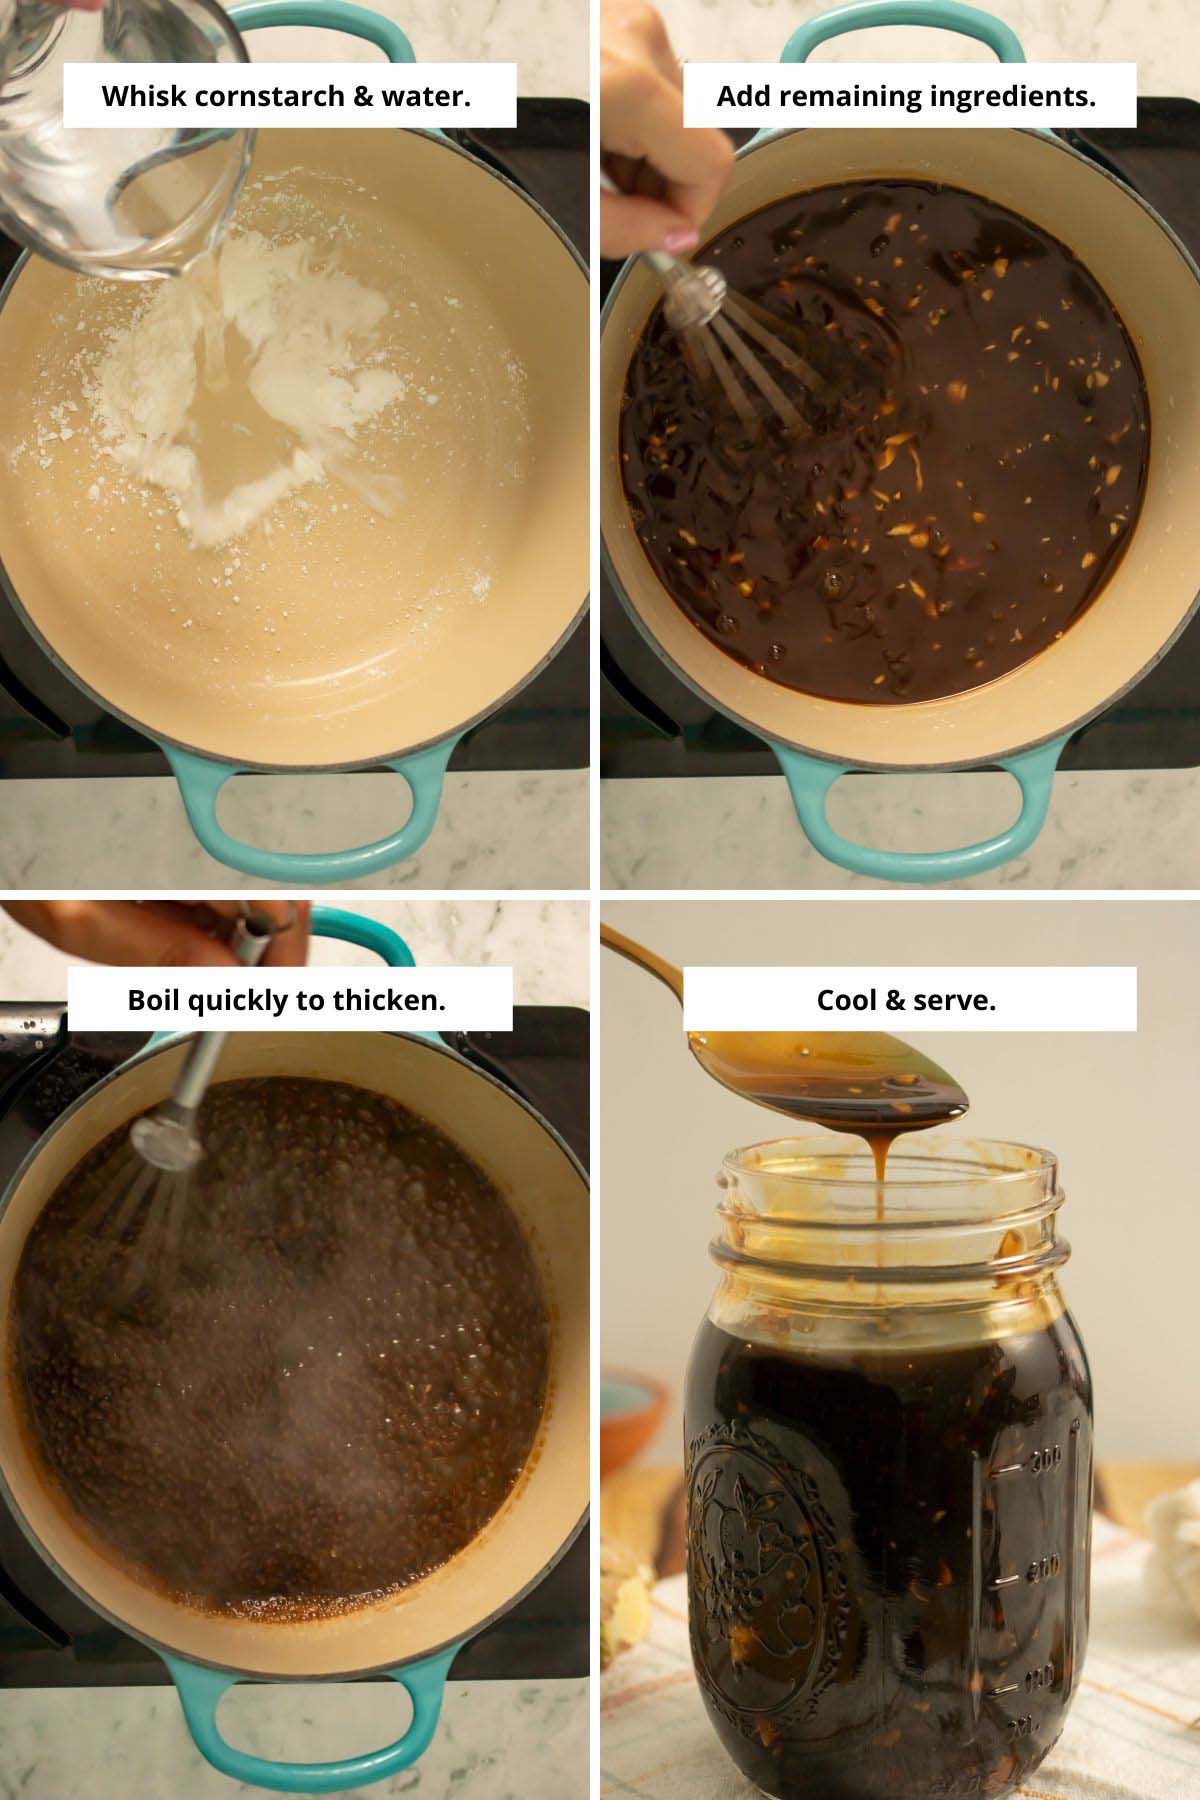 image collage showing combining the water and cornstarch in the pan, whisking all the sauce ingredients together, the sauce boiling in the pan, and the finished bottle of teriyaki sauce with a spoon drizzling sauce